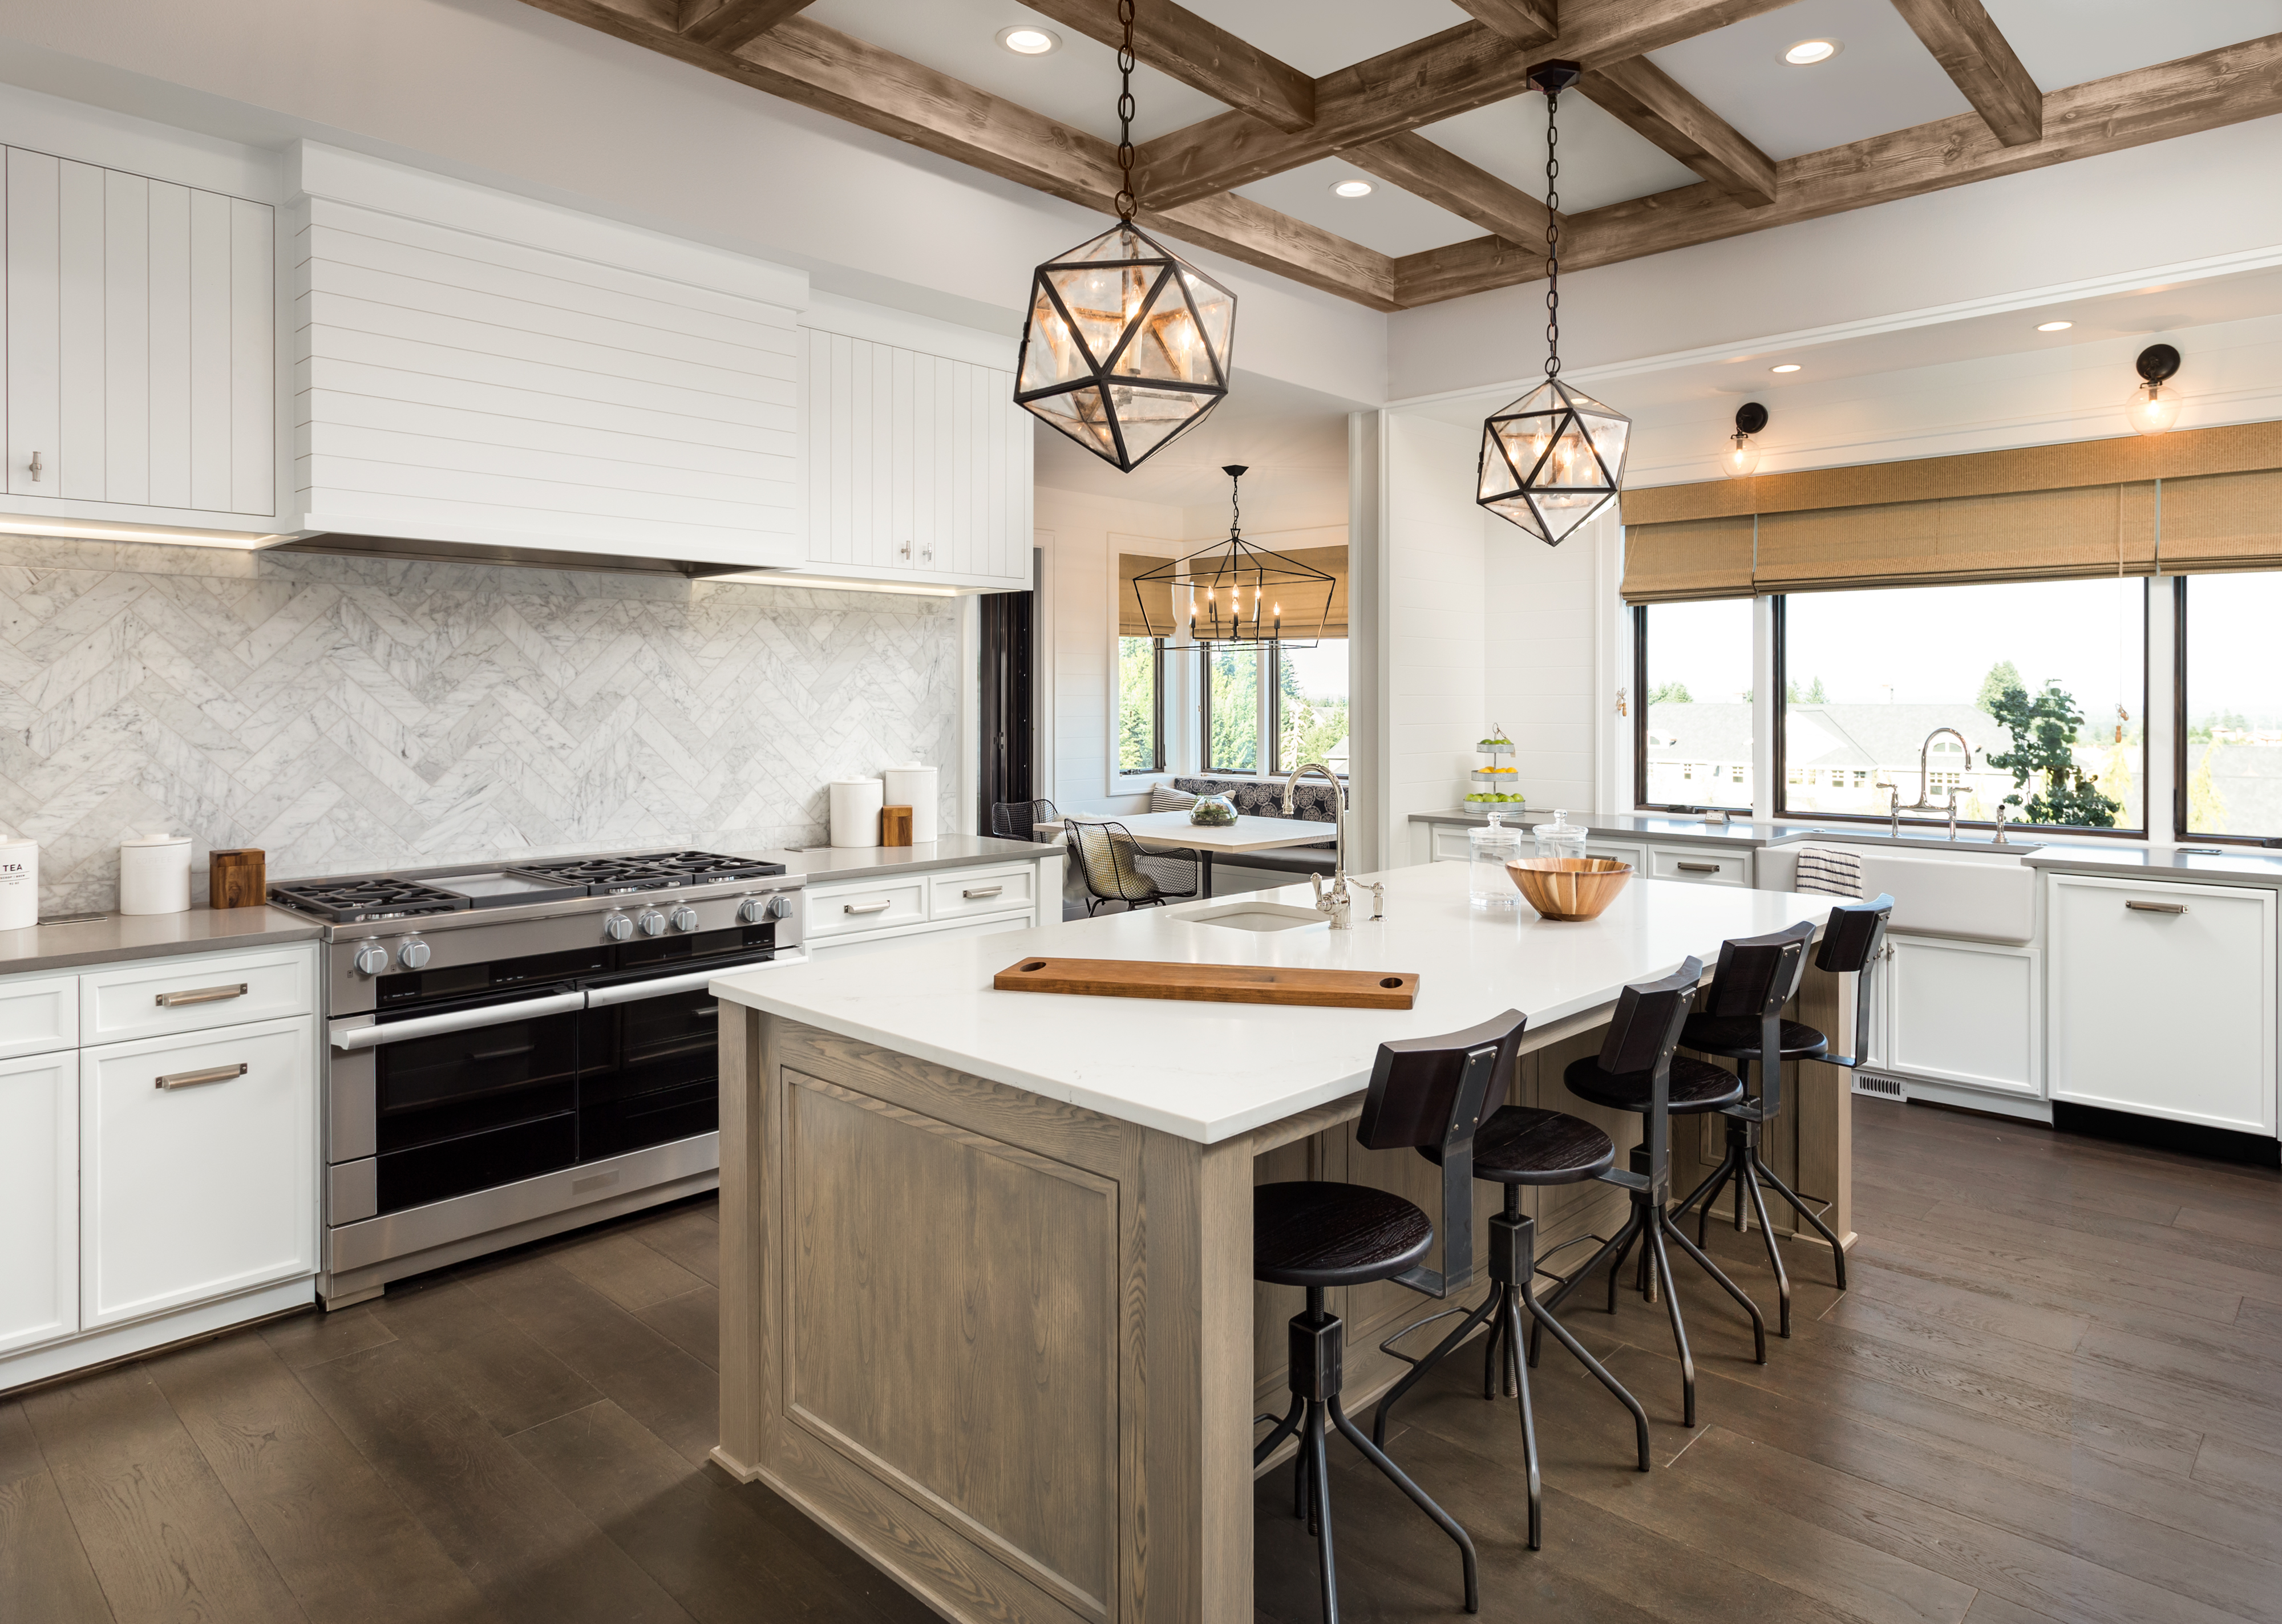 Well lit kitchen with pendant lighting and tan accents